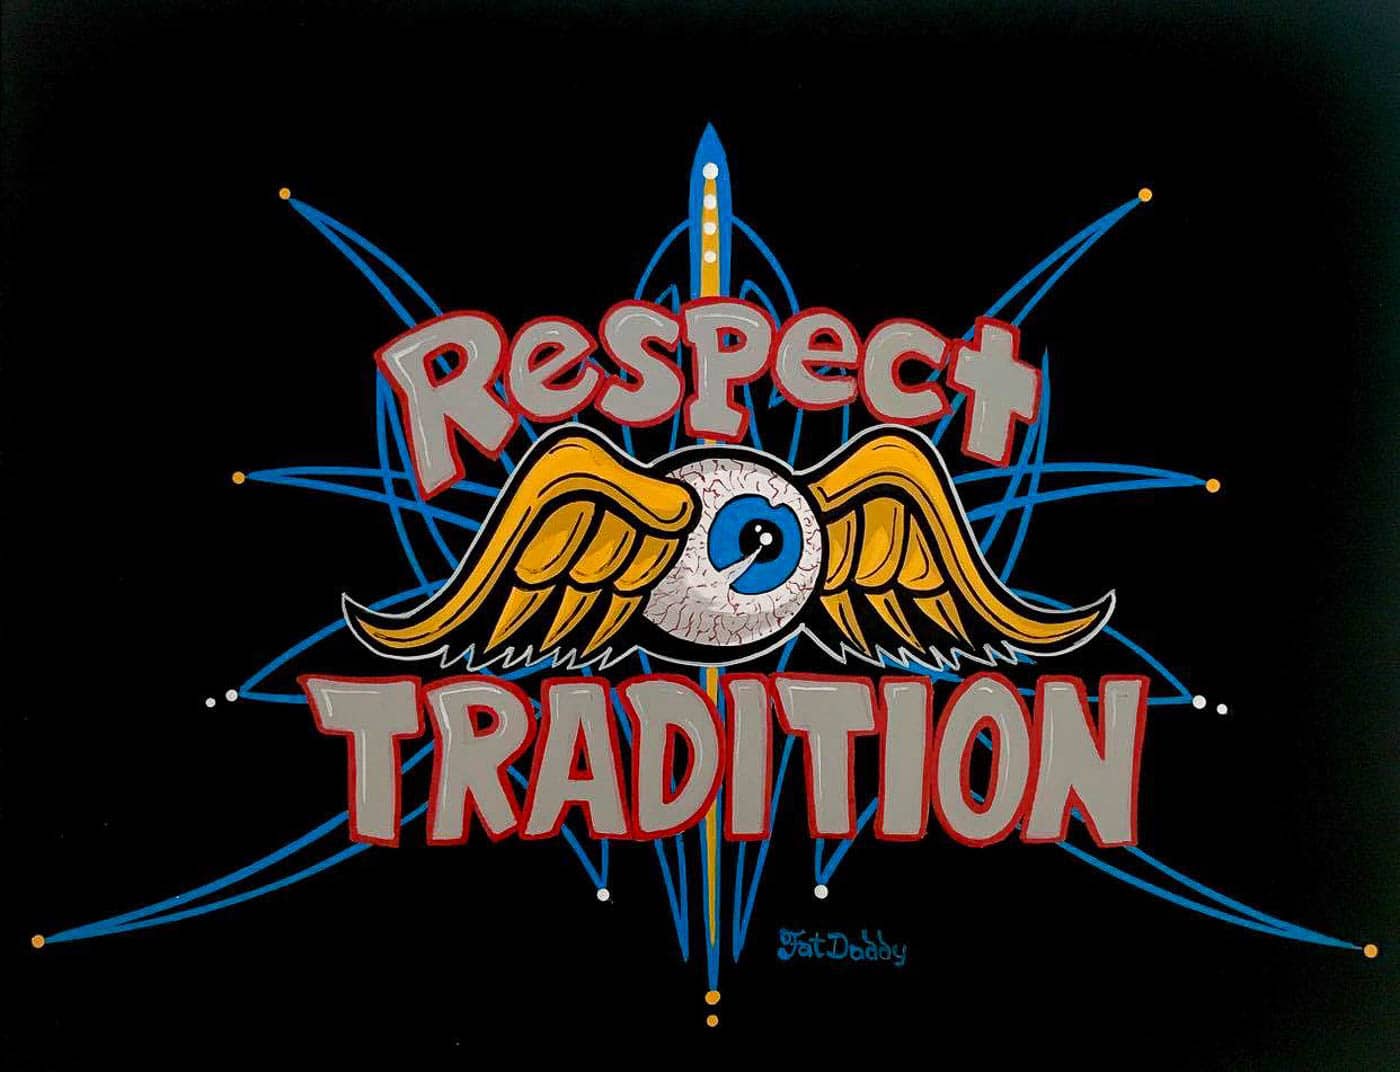 Flying eyeball with pinstripes and Respect Tradition text